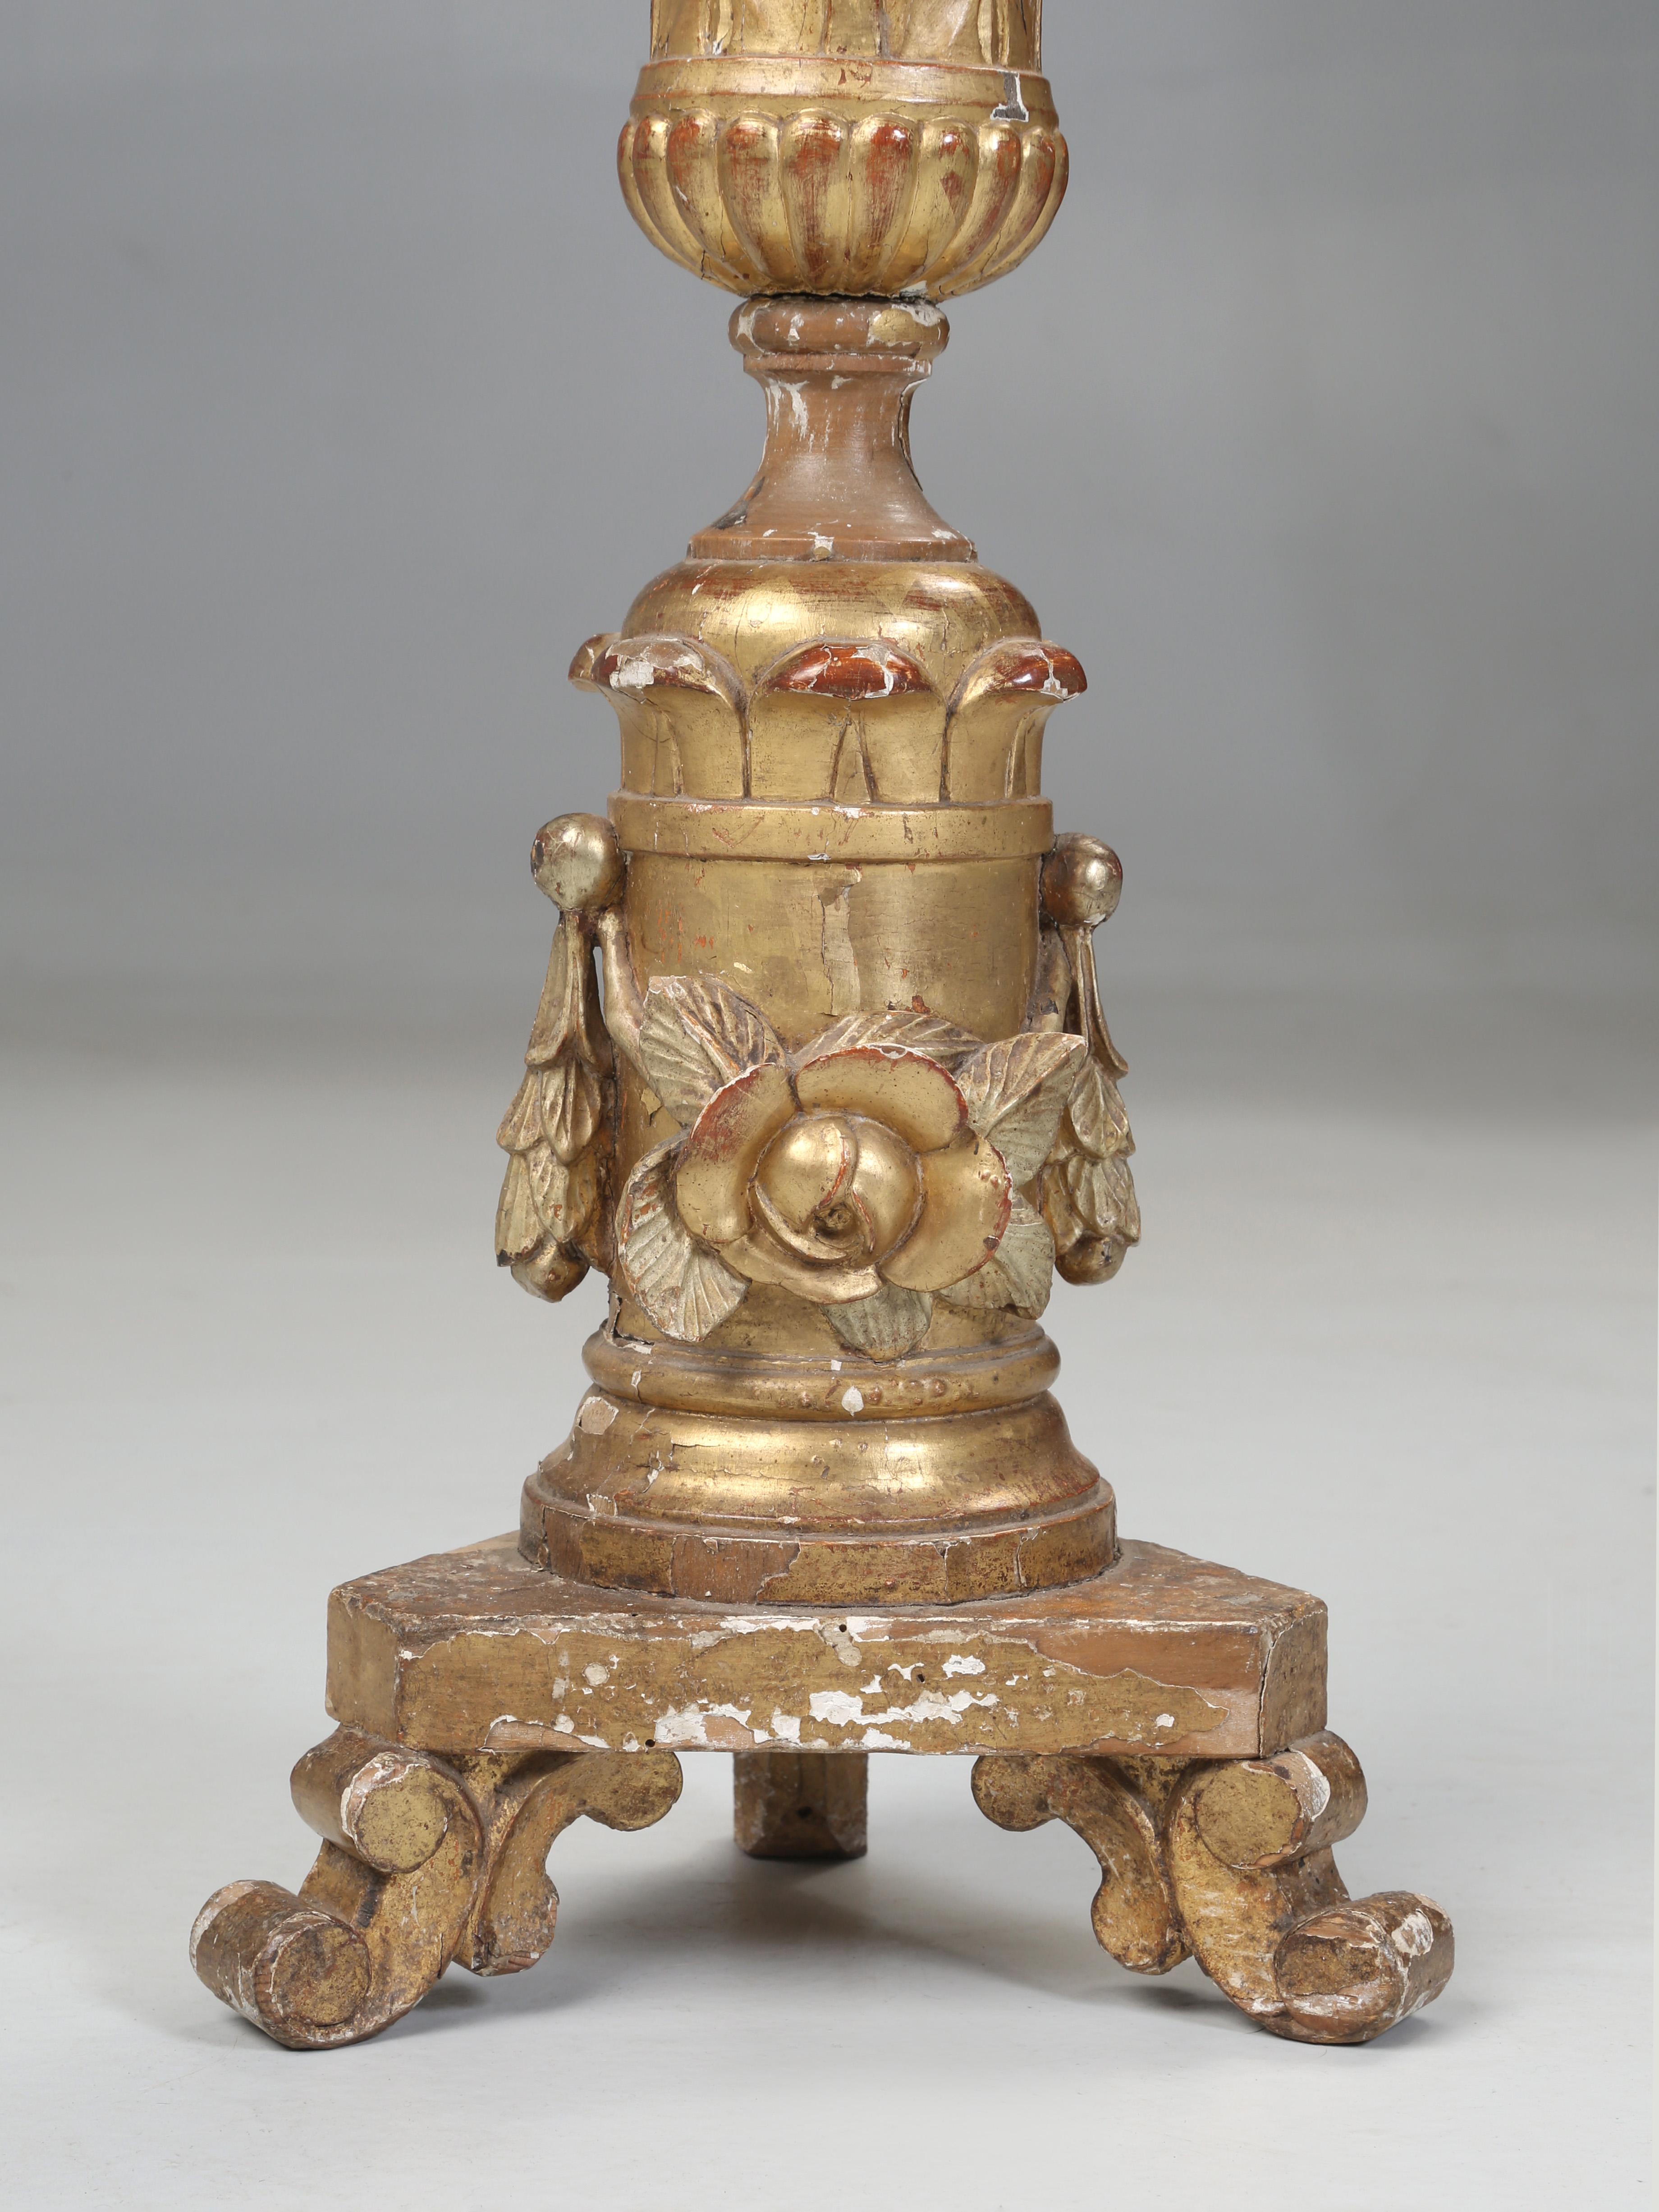 Late 18th Century Italian Gilded Altar Candlestick Completely Original and Unrestored c1780-1820 For Sale